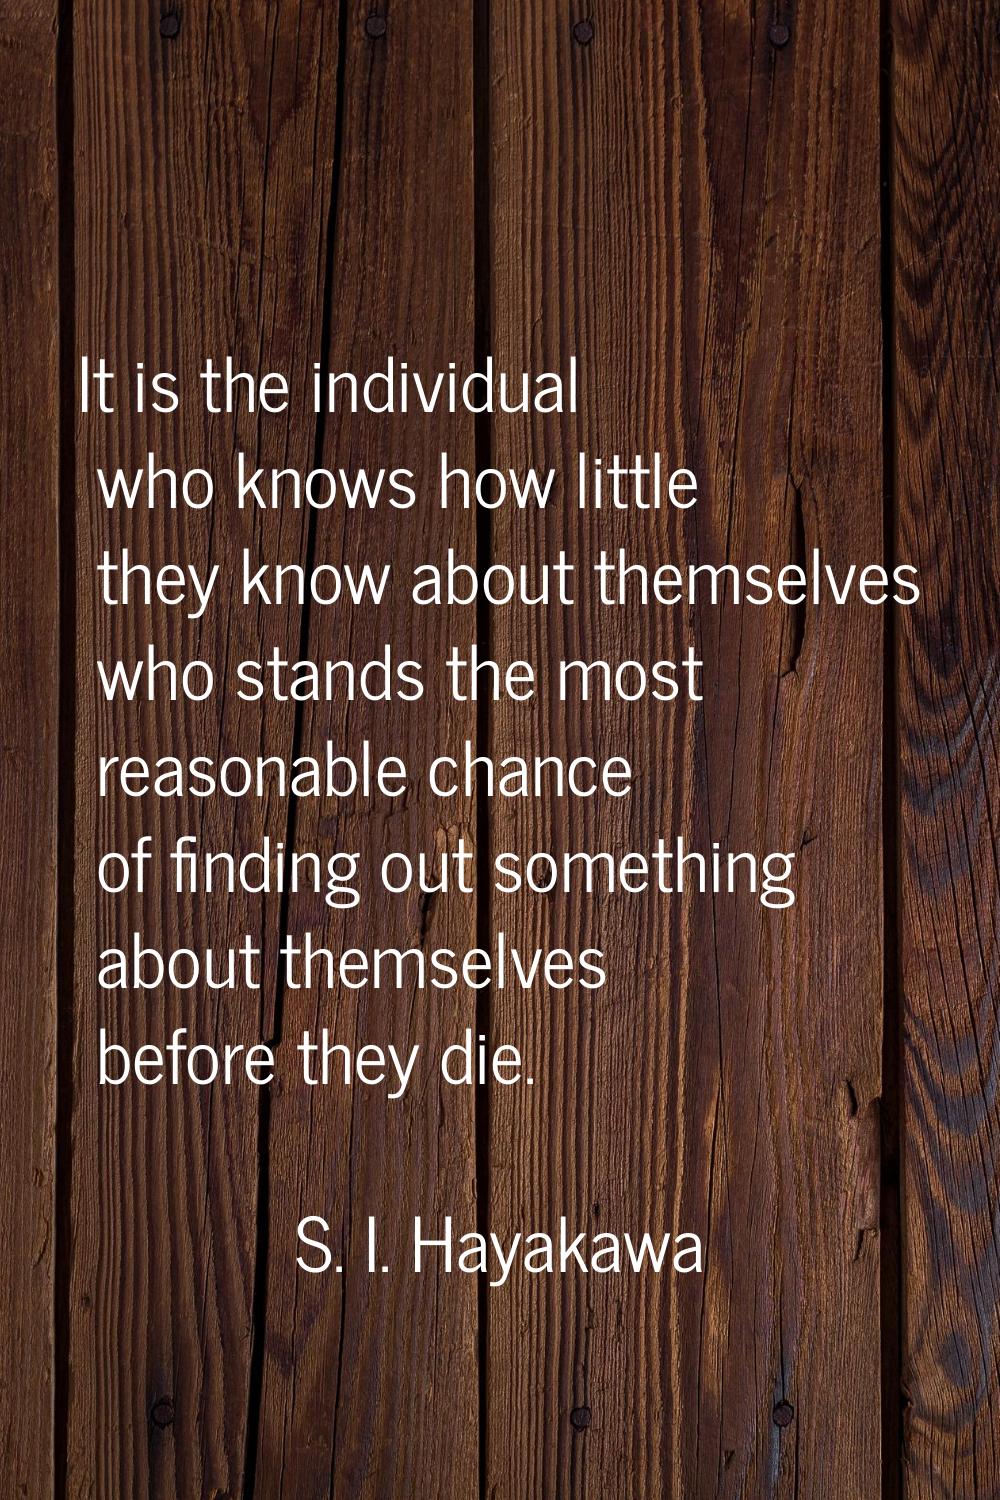 It is the individual who knows how little they know about themselves who stands the most reasonable